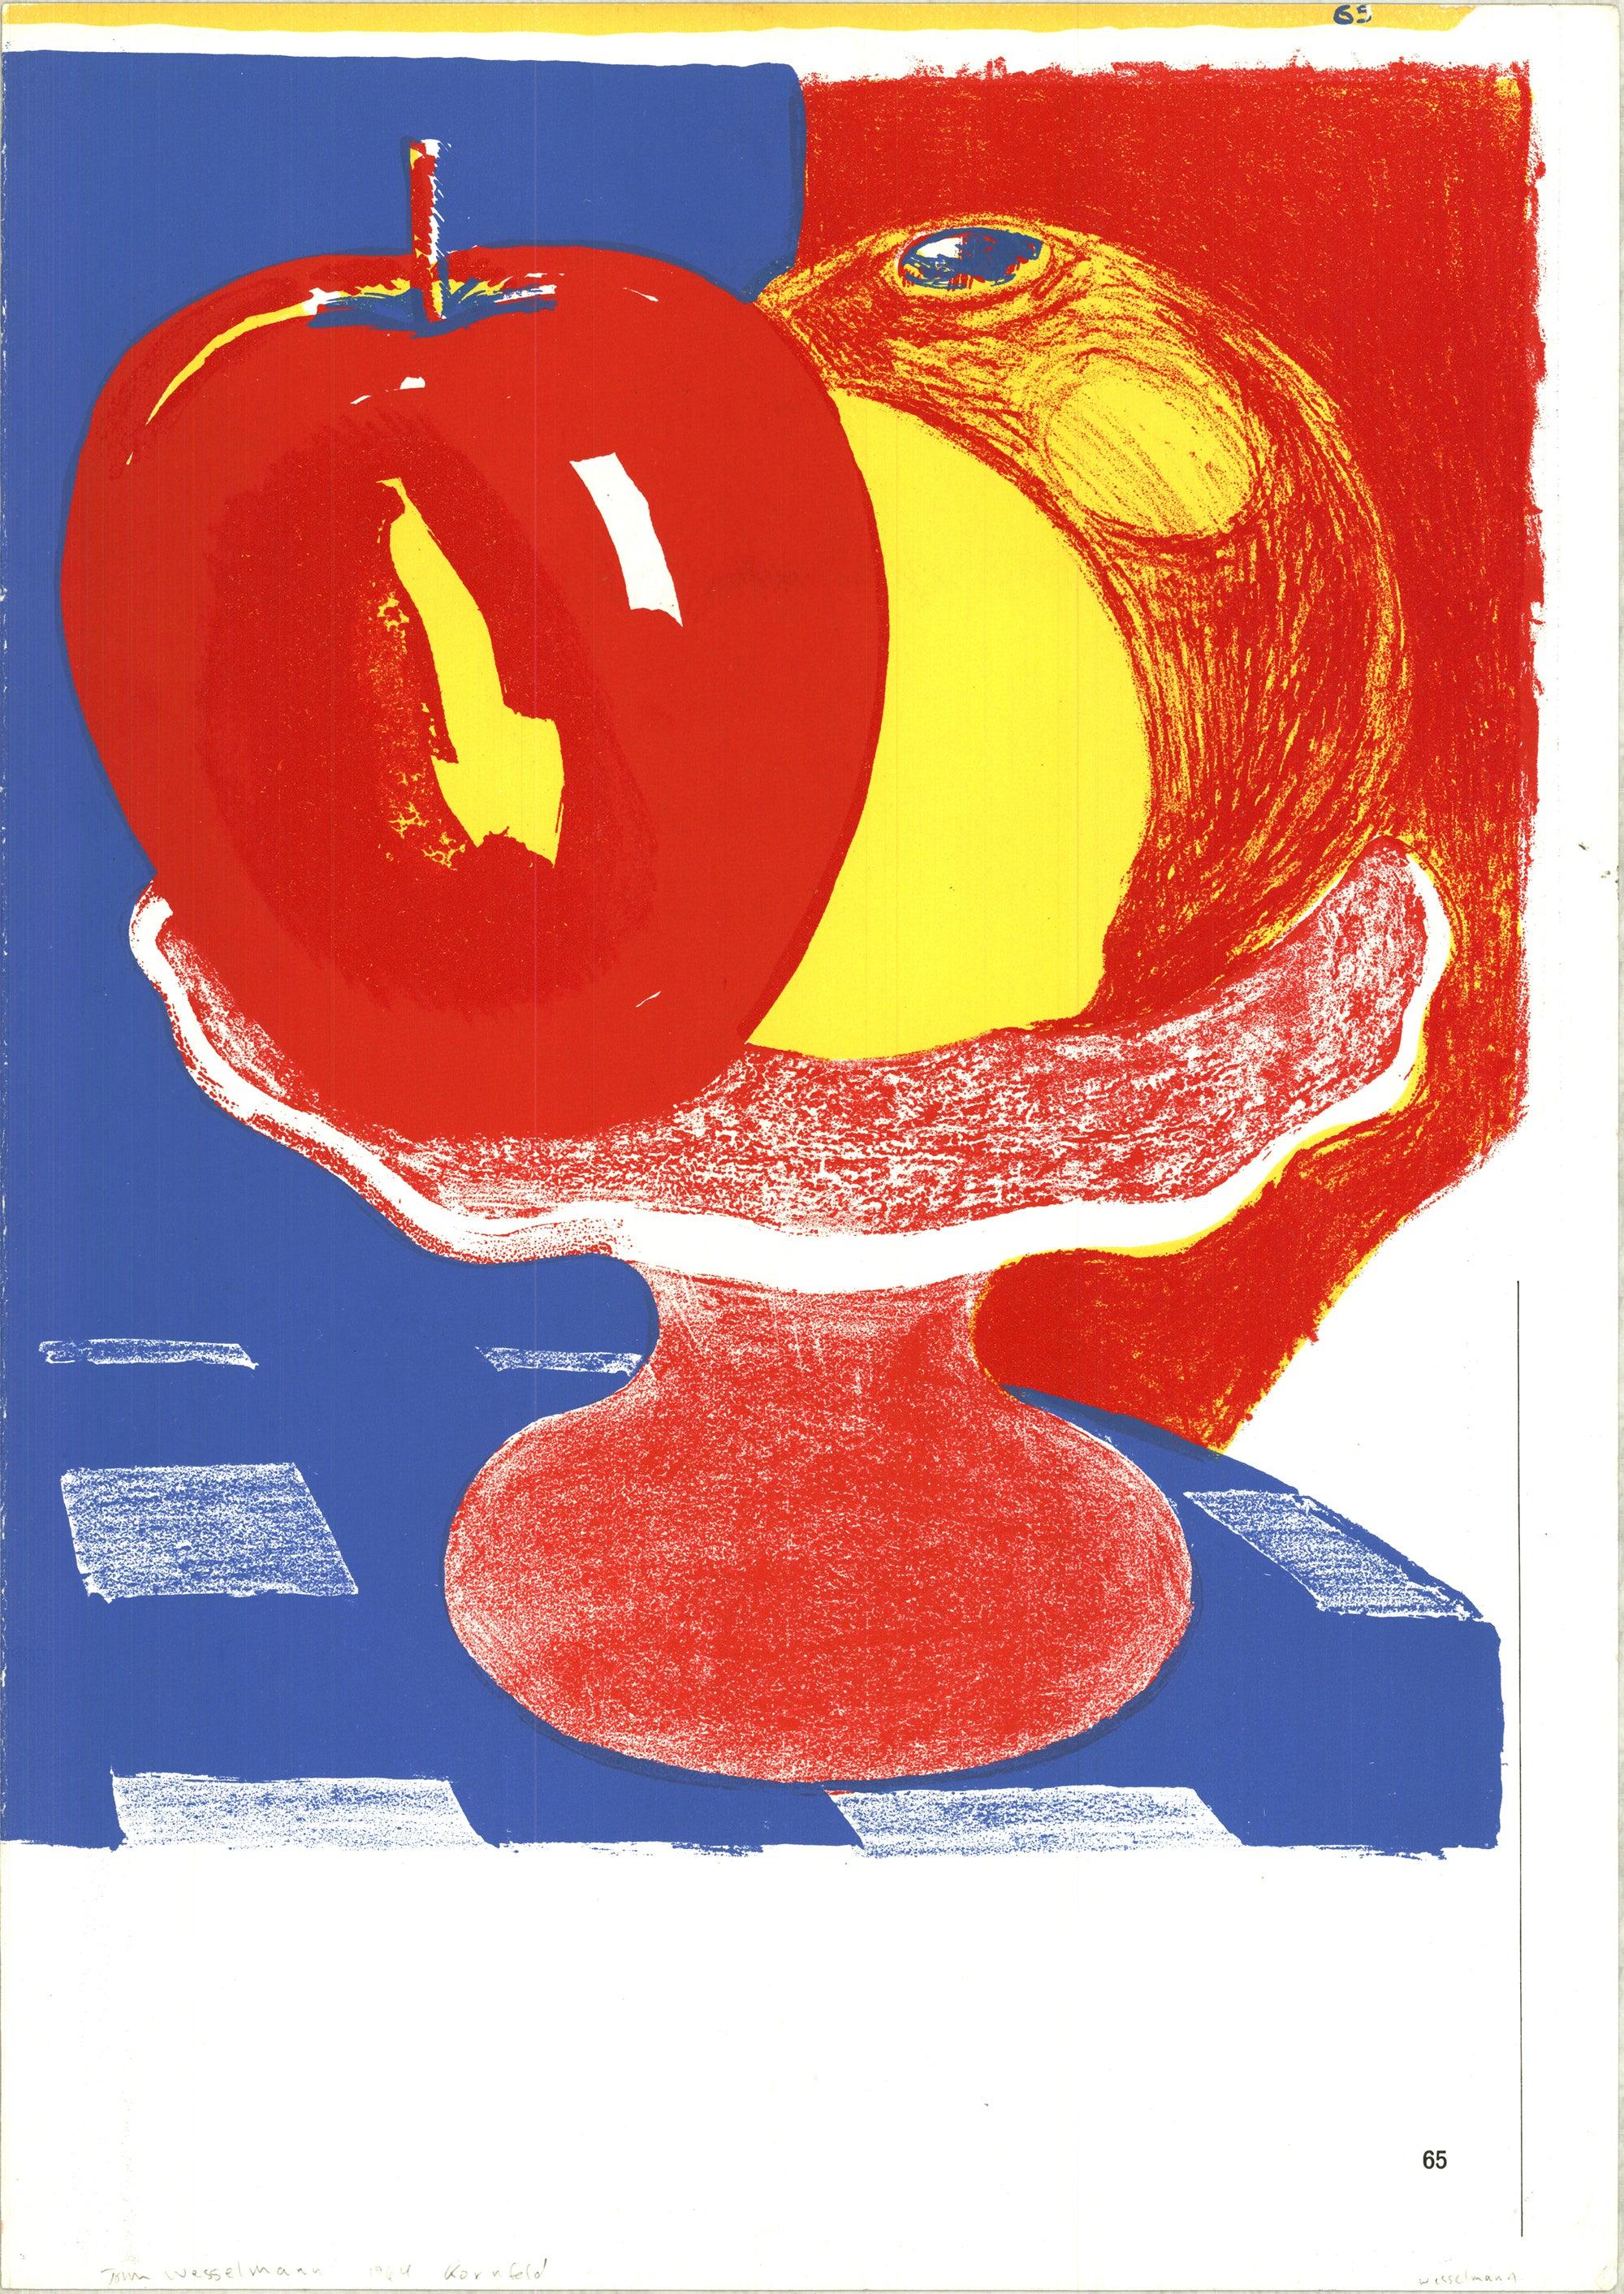 1964 Tom Wesselmann 'Untitled (from One Cent Life Portfolio)' (Sans titre, tiré du One Cent Life Portfolio) 